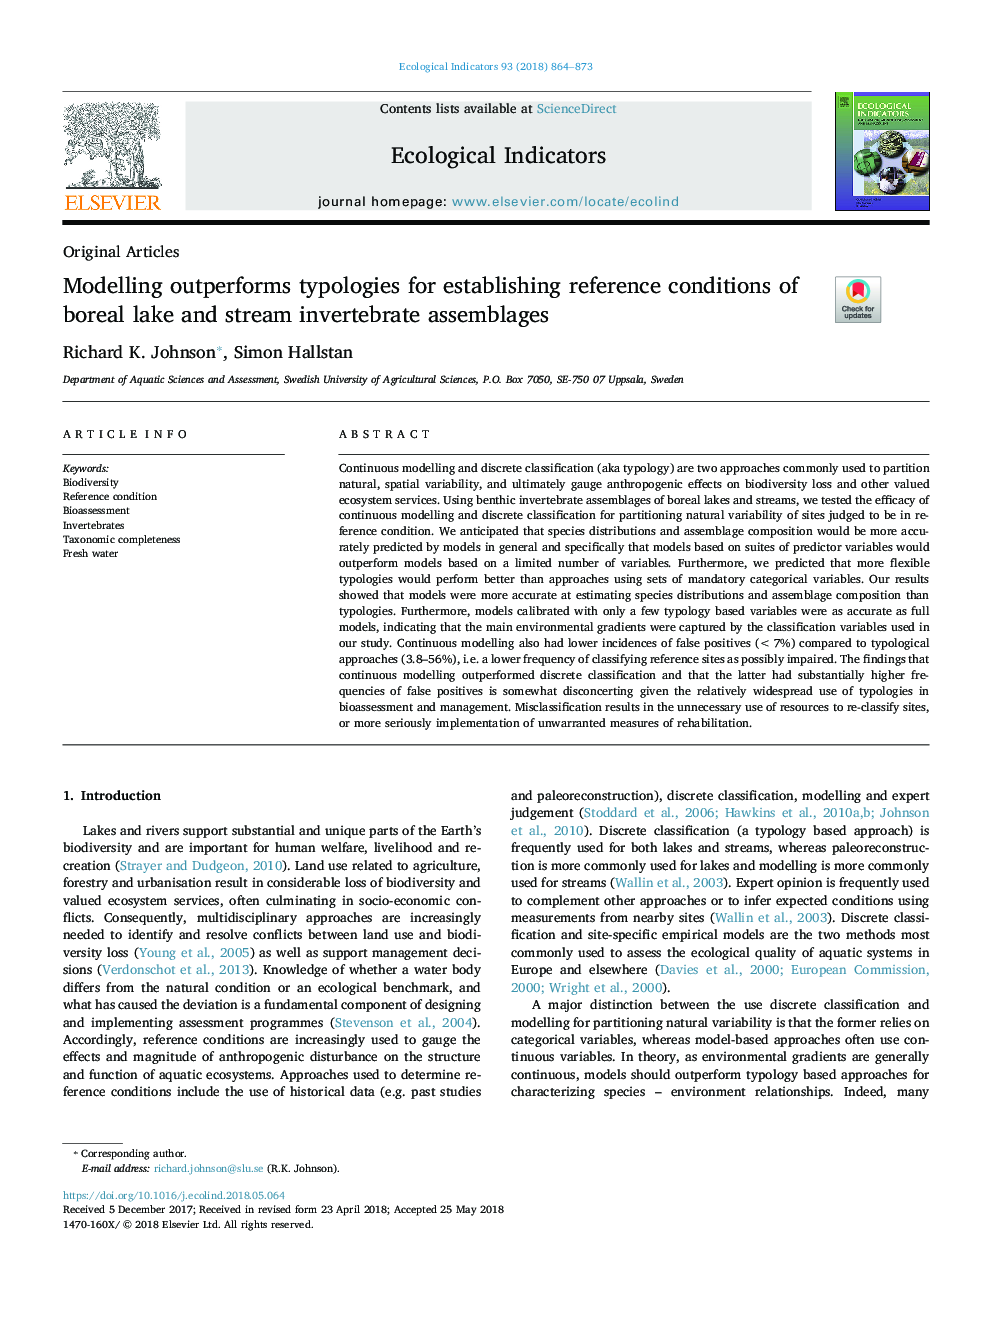 Modelling outperforms typologies for establishing reference conditions of boreal lake and stream invertebrate assemblages